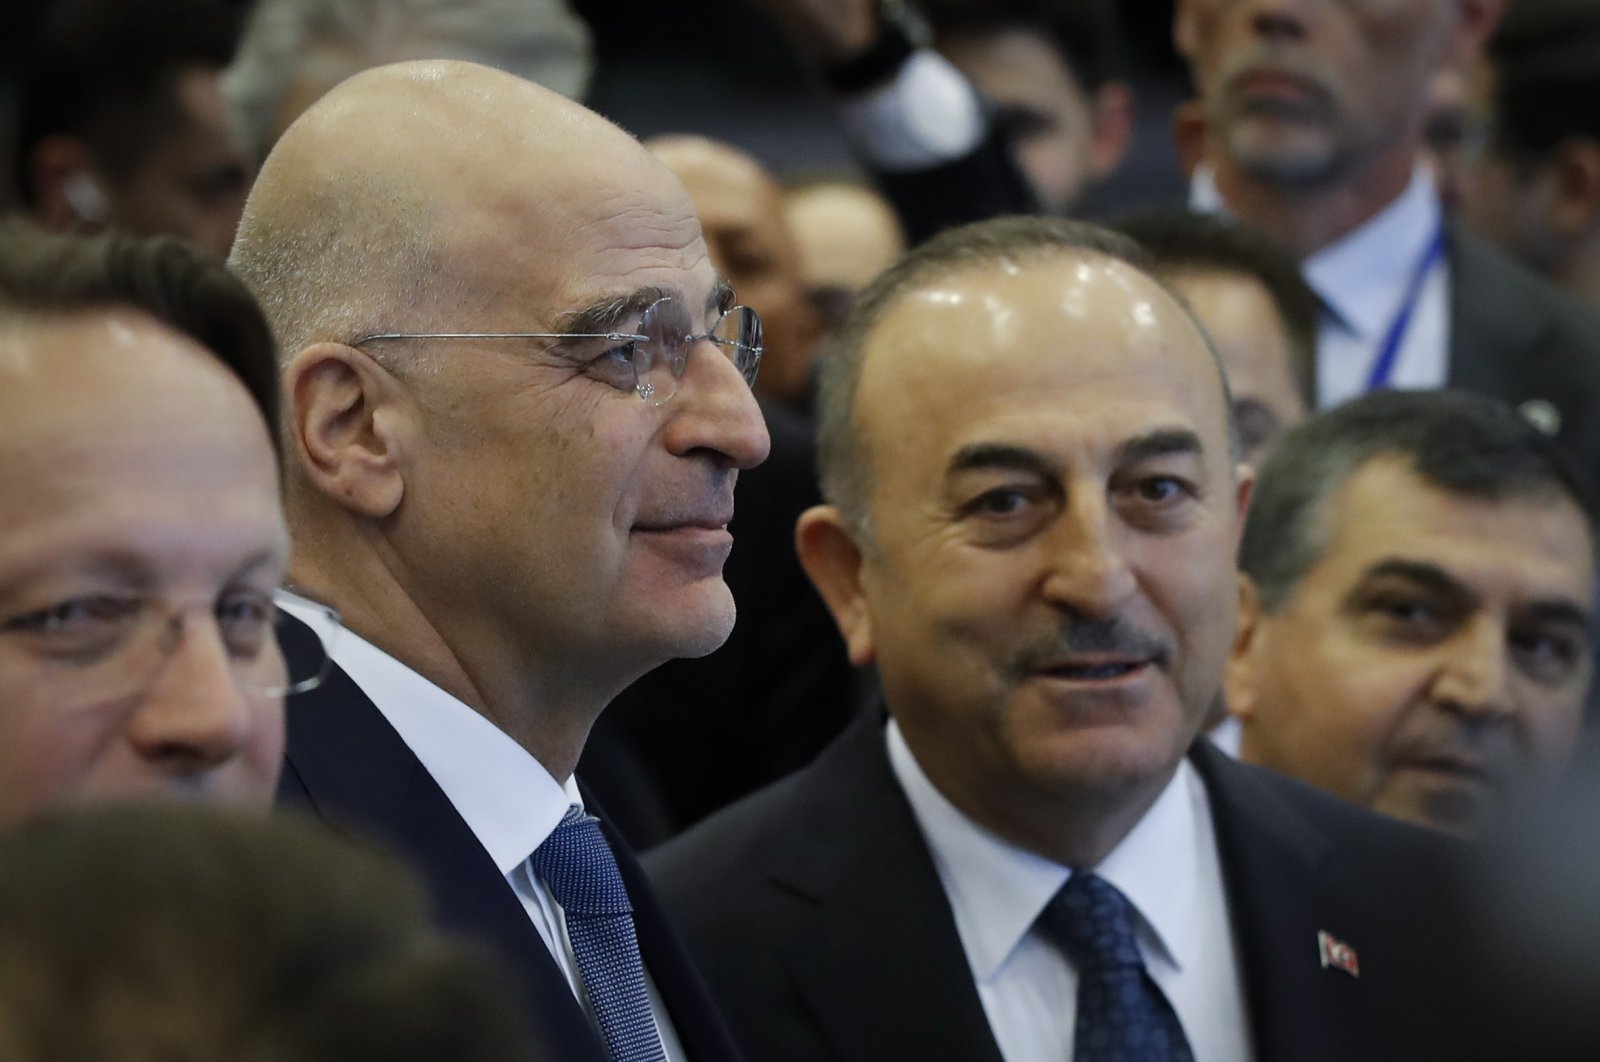 Foreign Minister Mevlüt Çavuşoğlu and Greek Foreign Minister Nikos Dendias stand together at the opening of an international donors&#039; conference in support of the people in earthquake stricken regions in Türkiye and Syria, in Brussels, Belgium, March 20, 2023. (EPA File Photo)